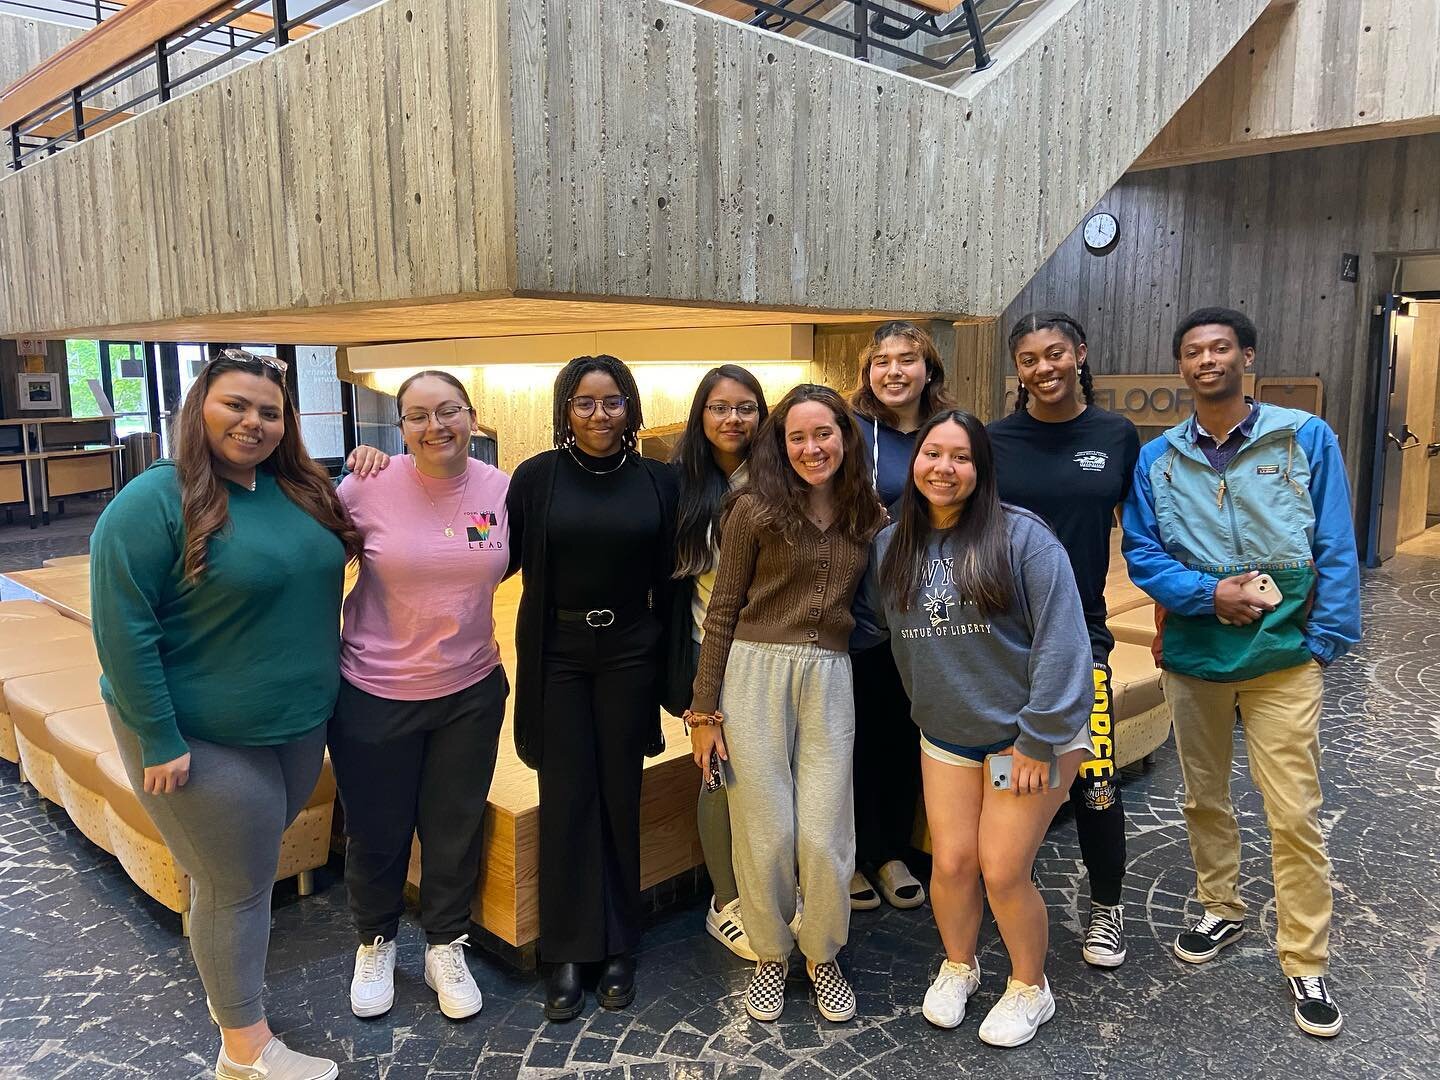 We are beyond happy for all the work and advancements that&rsquo;s been done with the Refuge club during the 22-23 school year. A special thank you to Mentalla Ismail (@mentalla_ ) and Brittney Cabrera (@brittneyacabrera ) for their guidance and lead